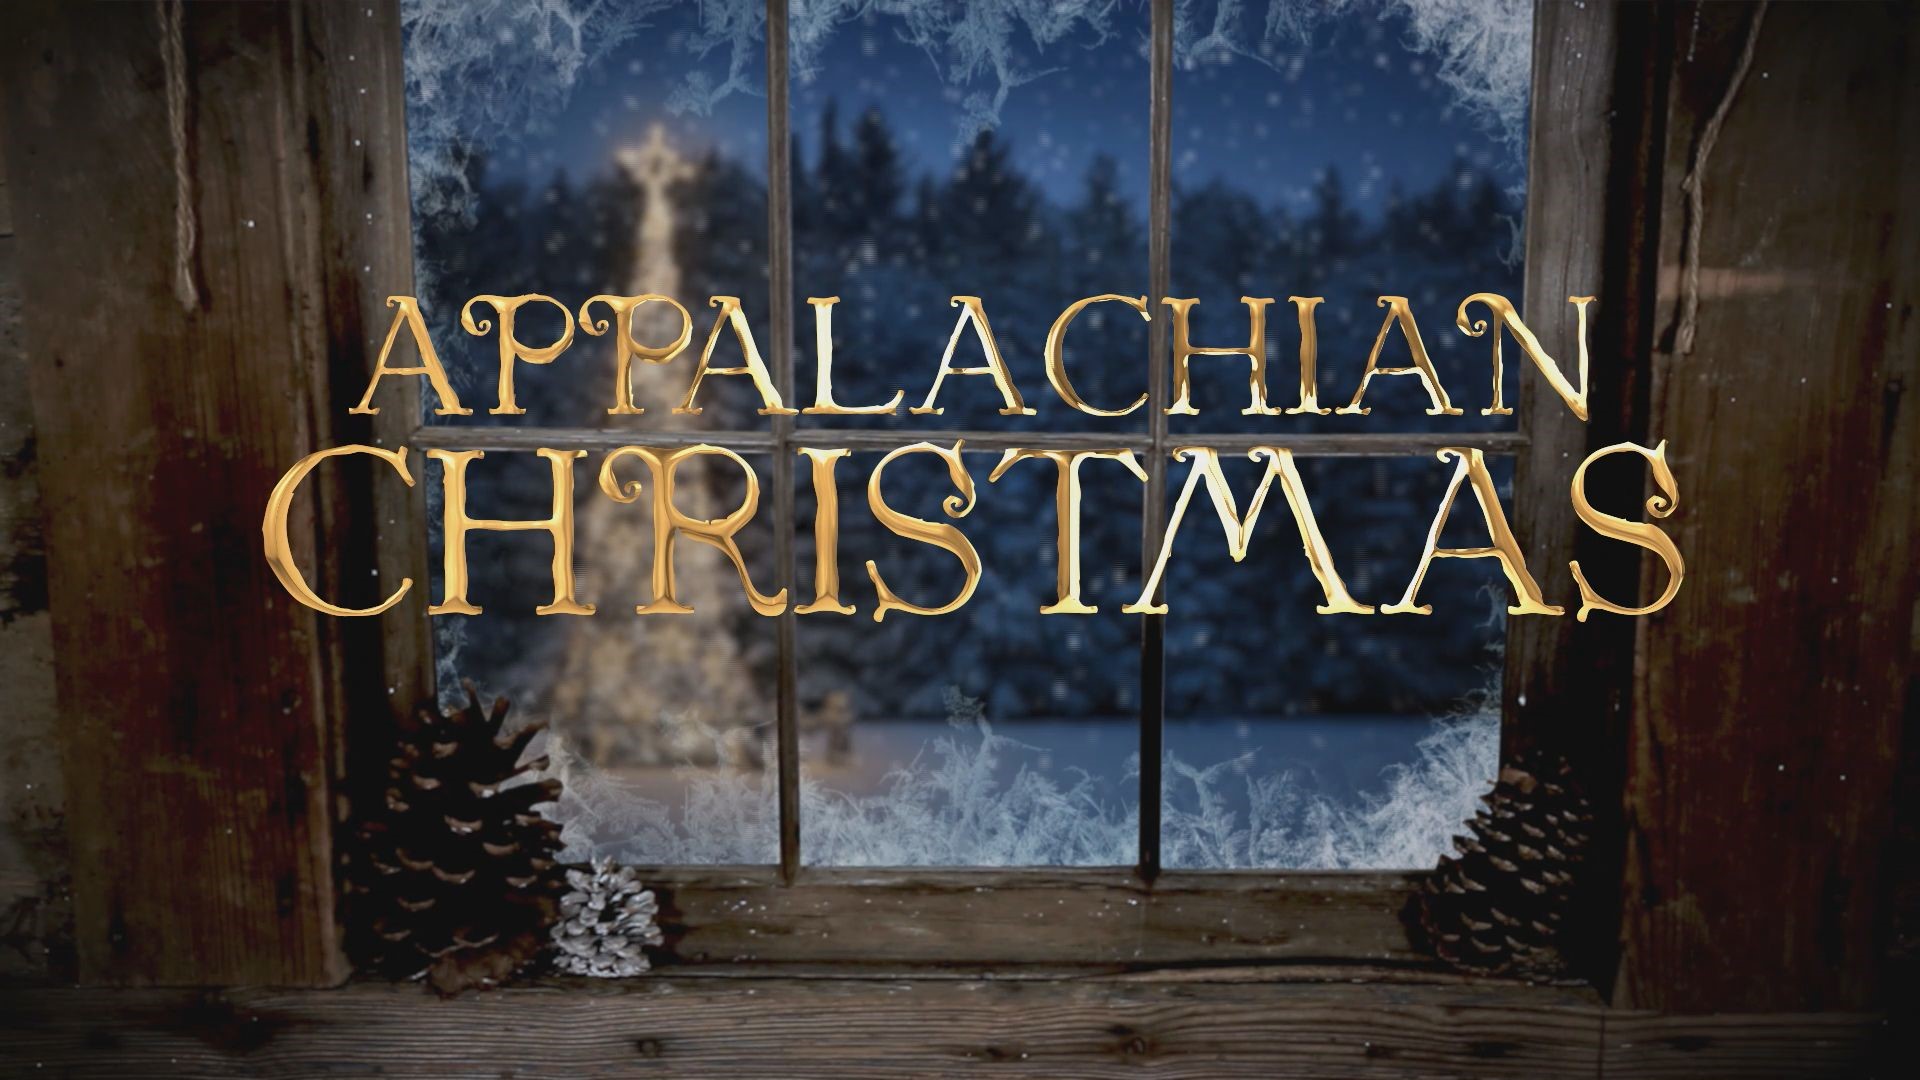 Christmas in Appalachia looks different today than it did decades ago. You can trace today's festivities back to the mountains in this 2019 WBIR holiday special.